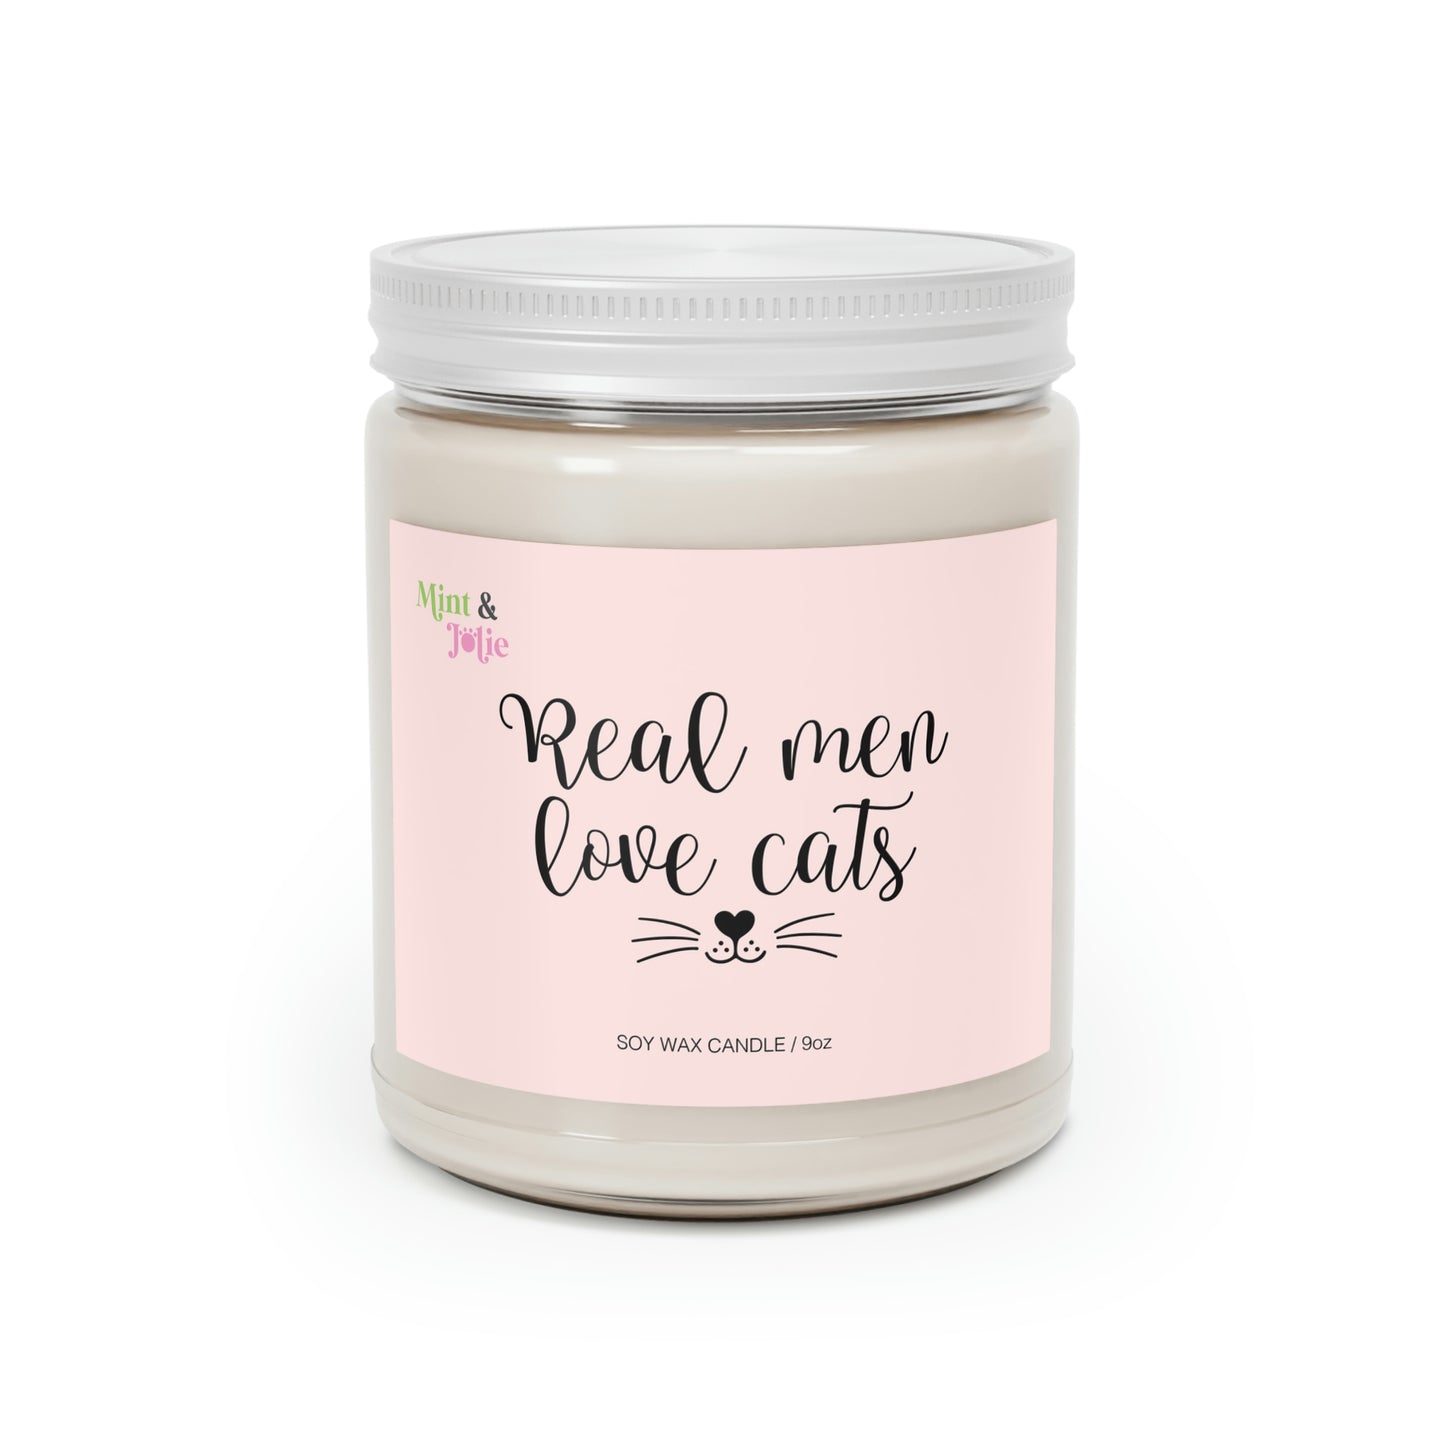 Real Men Love Cats Scented Candles, 9oz